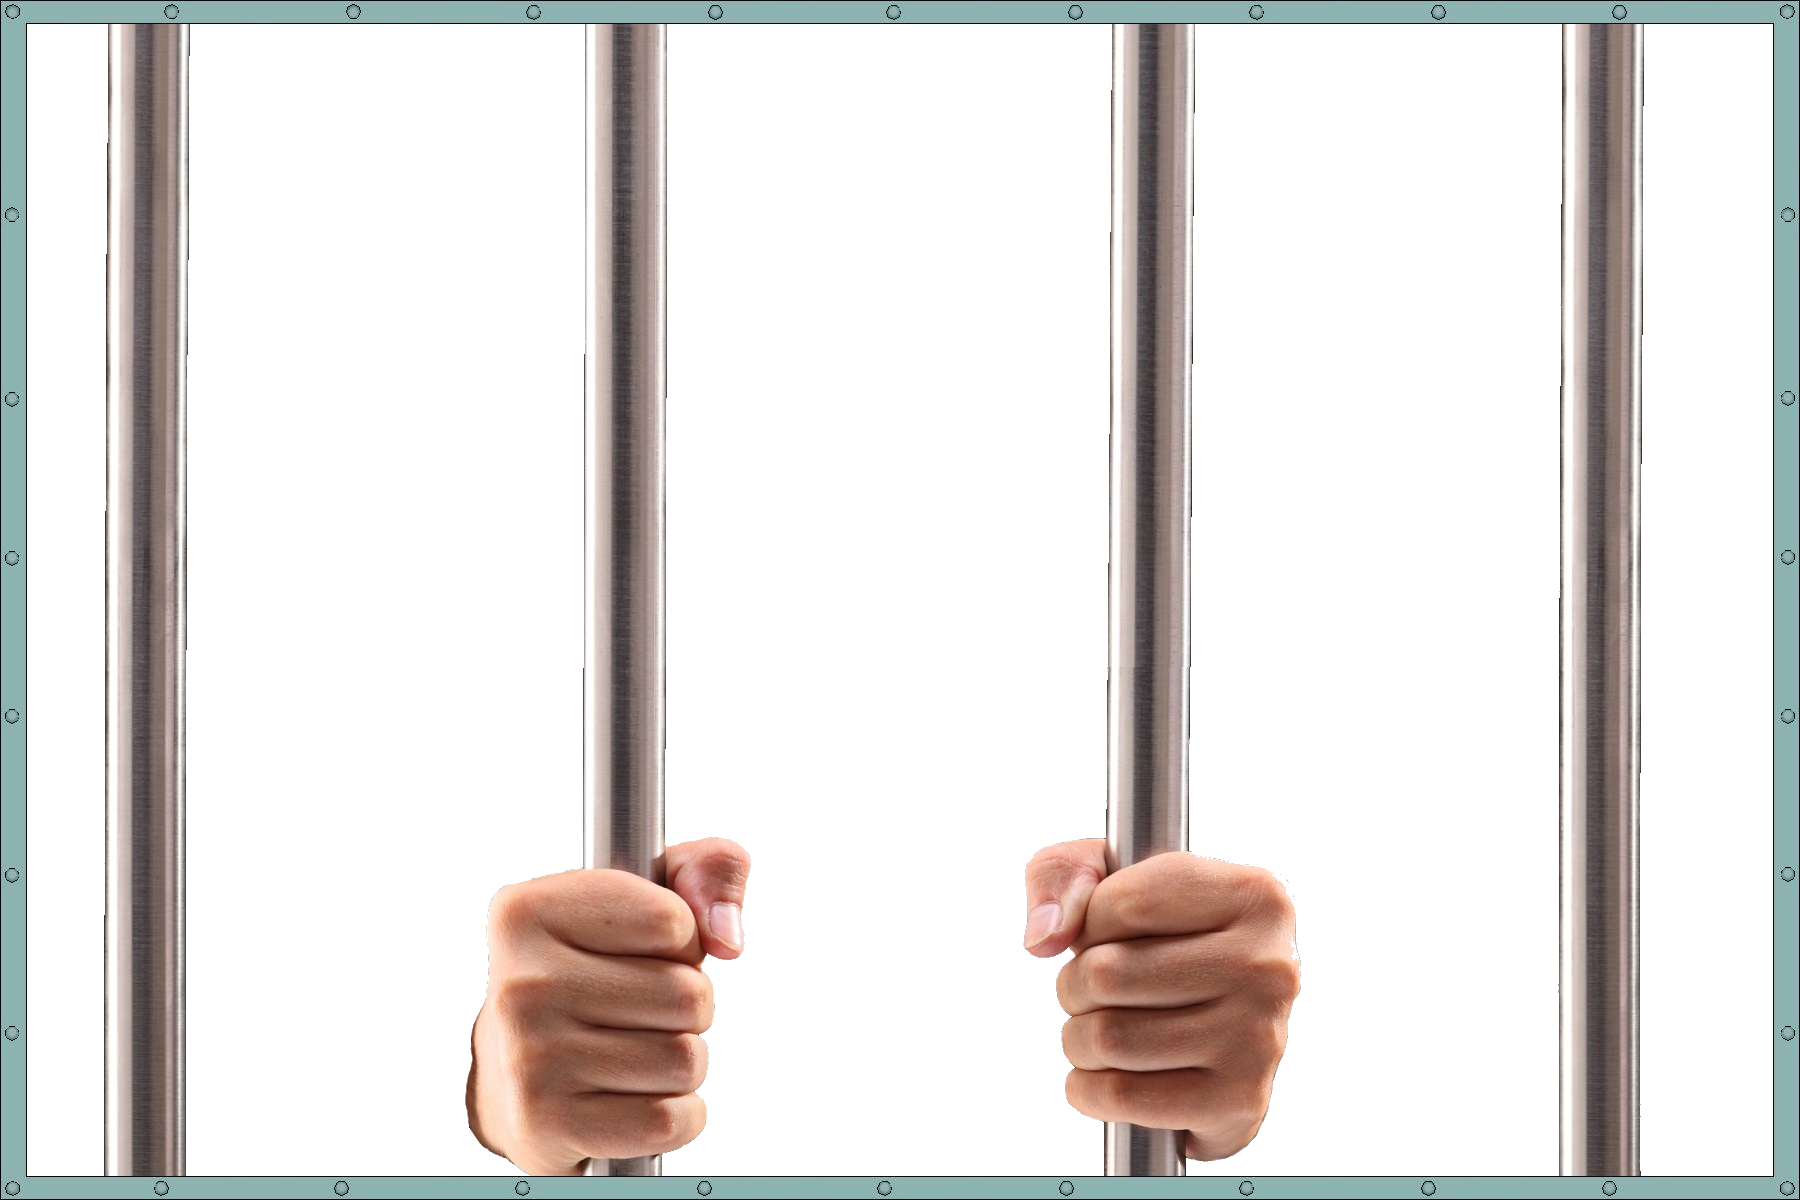 Png images prison free. Gate clipart jail